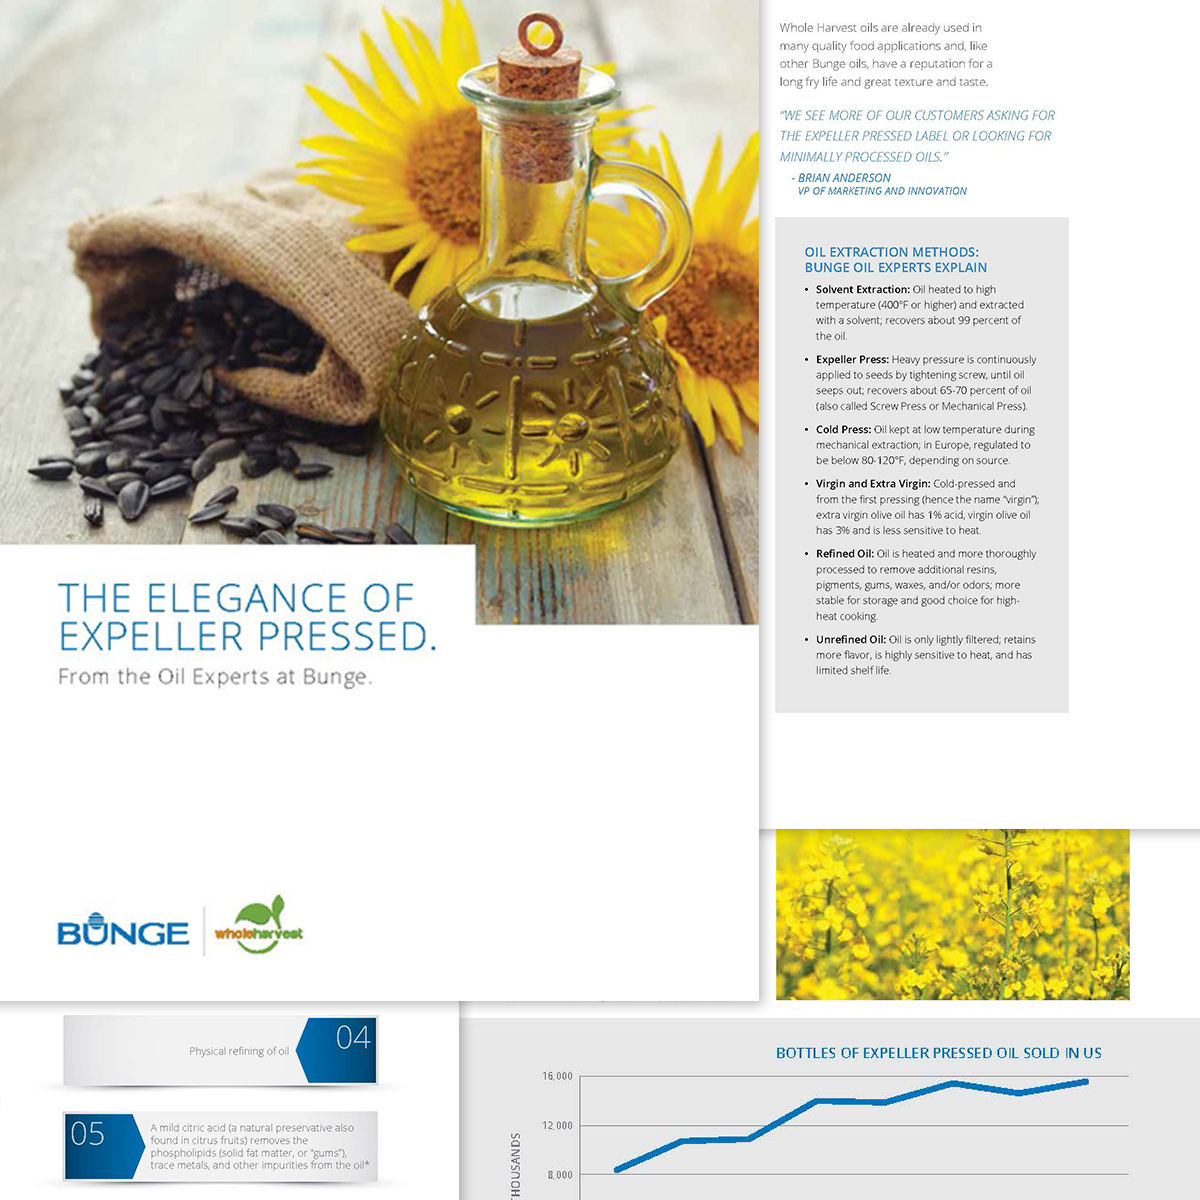 bunge white paper the elegance of expeller pressed oil experts